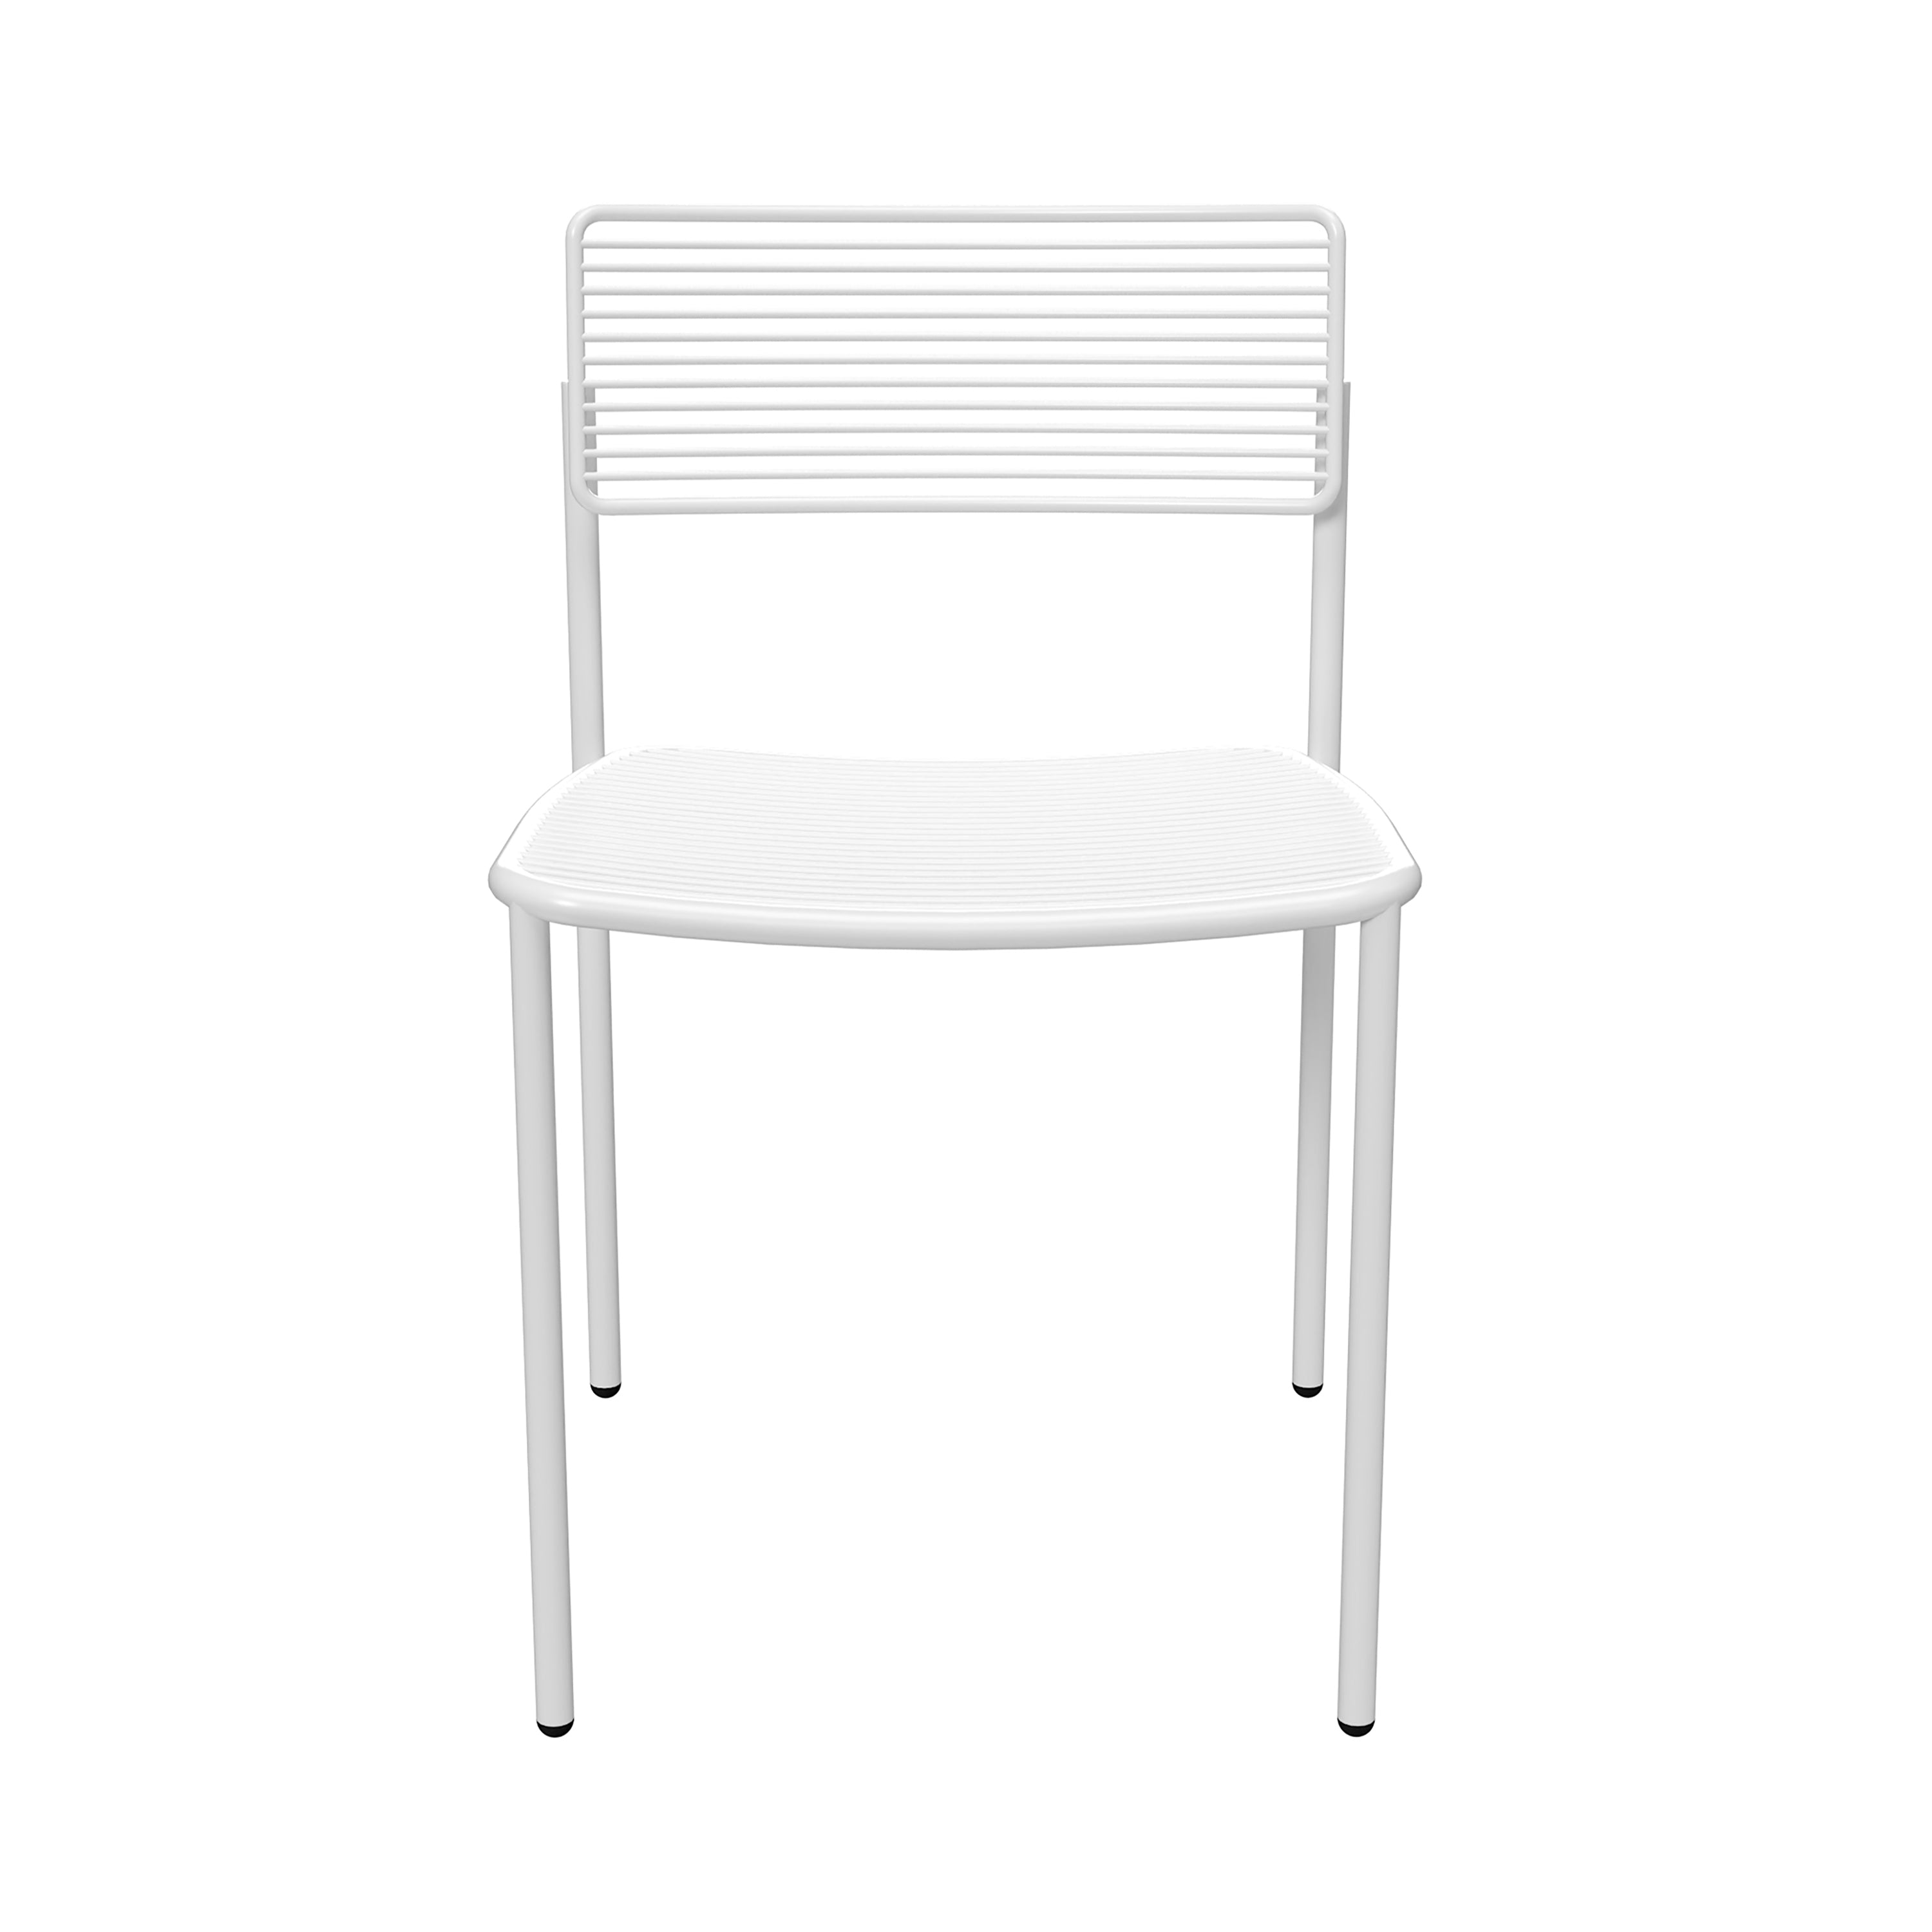 The Rachel Chair: White + Without Seatpad